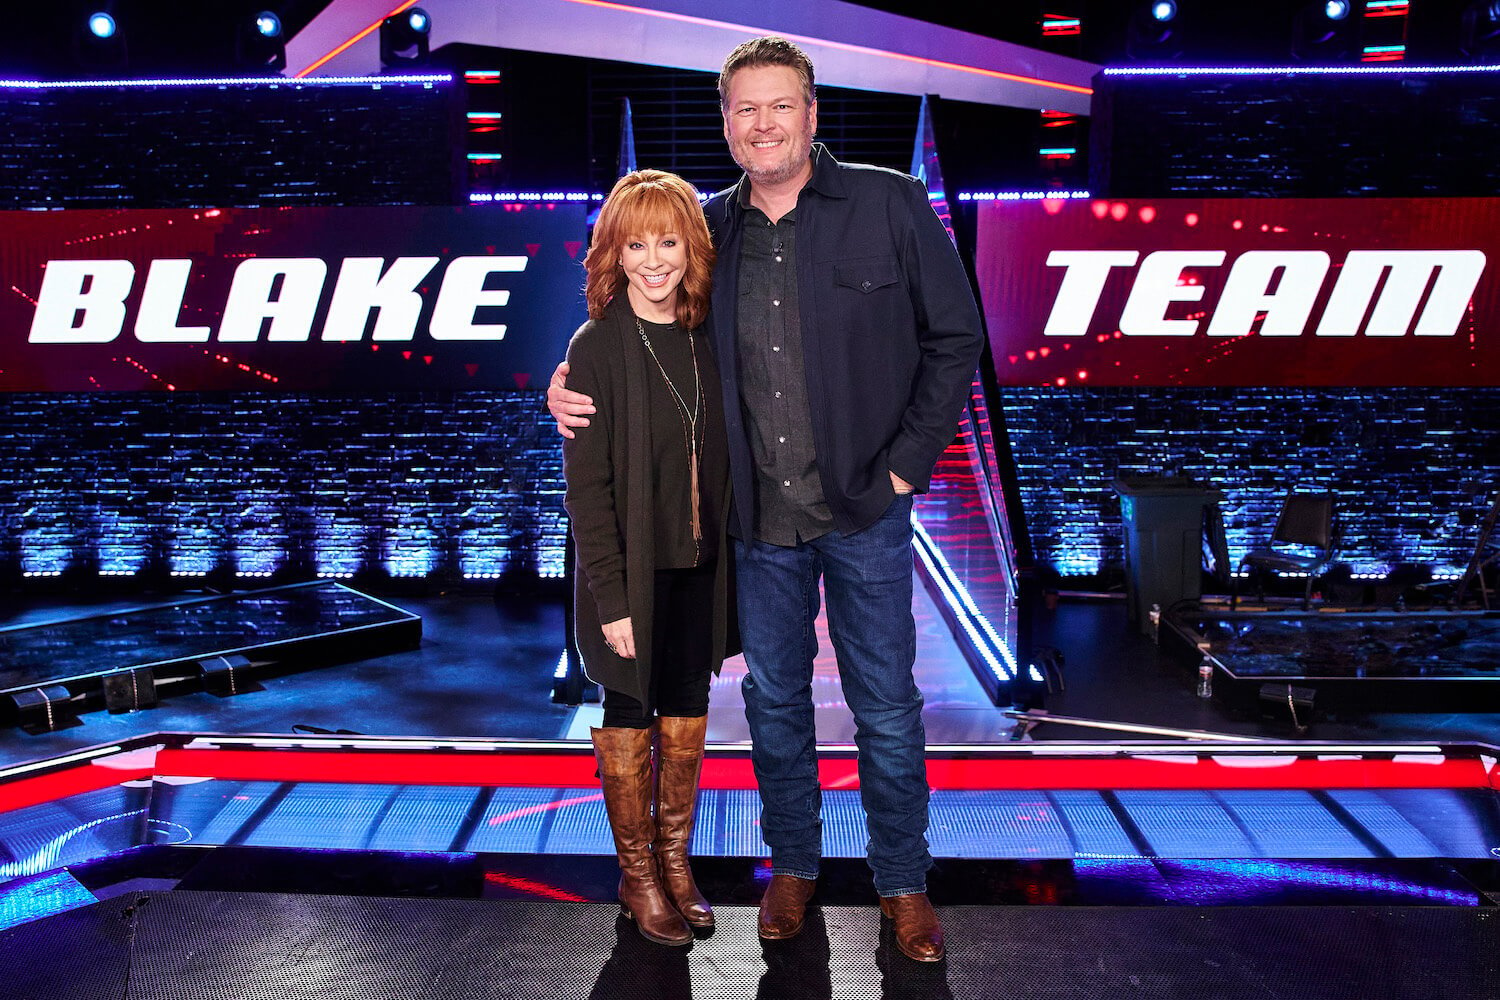 Reba McEntire hugging Blake Shelton on the set of 'The Voice.' There is a 'Blake Team' sign behind them.